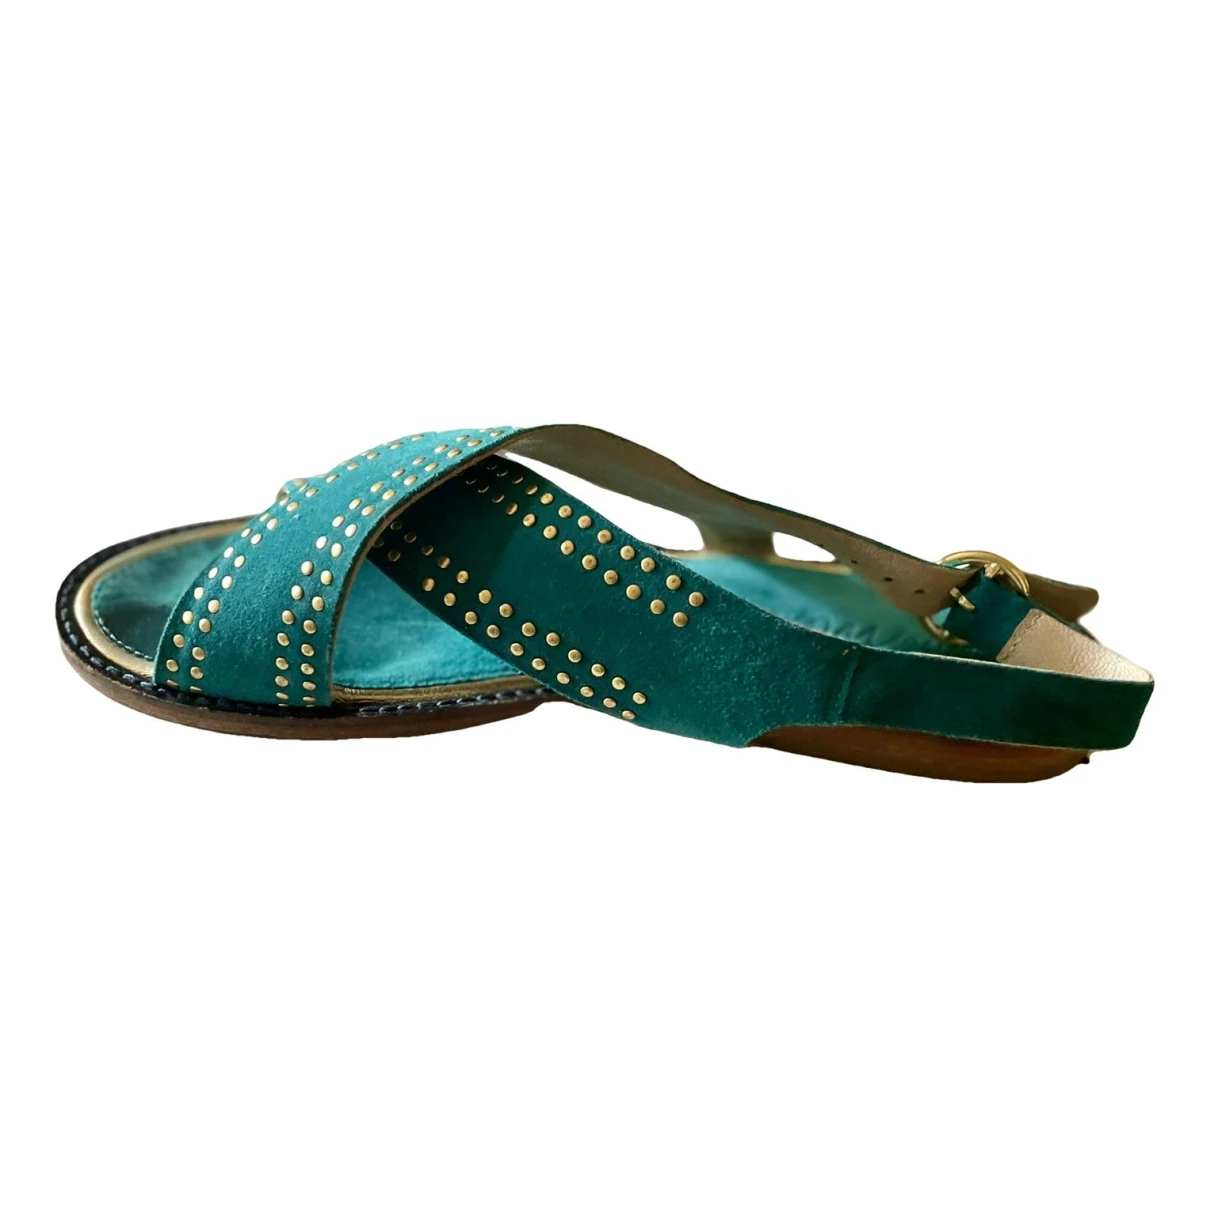 Pre-owned Petite Mendigote Sandal In Turquoise